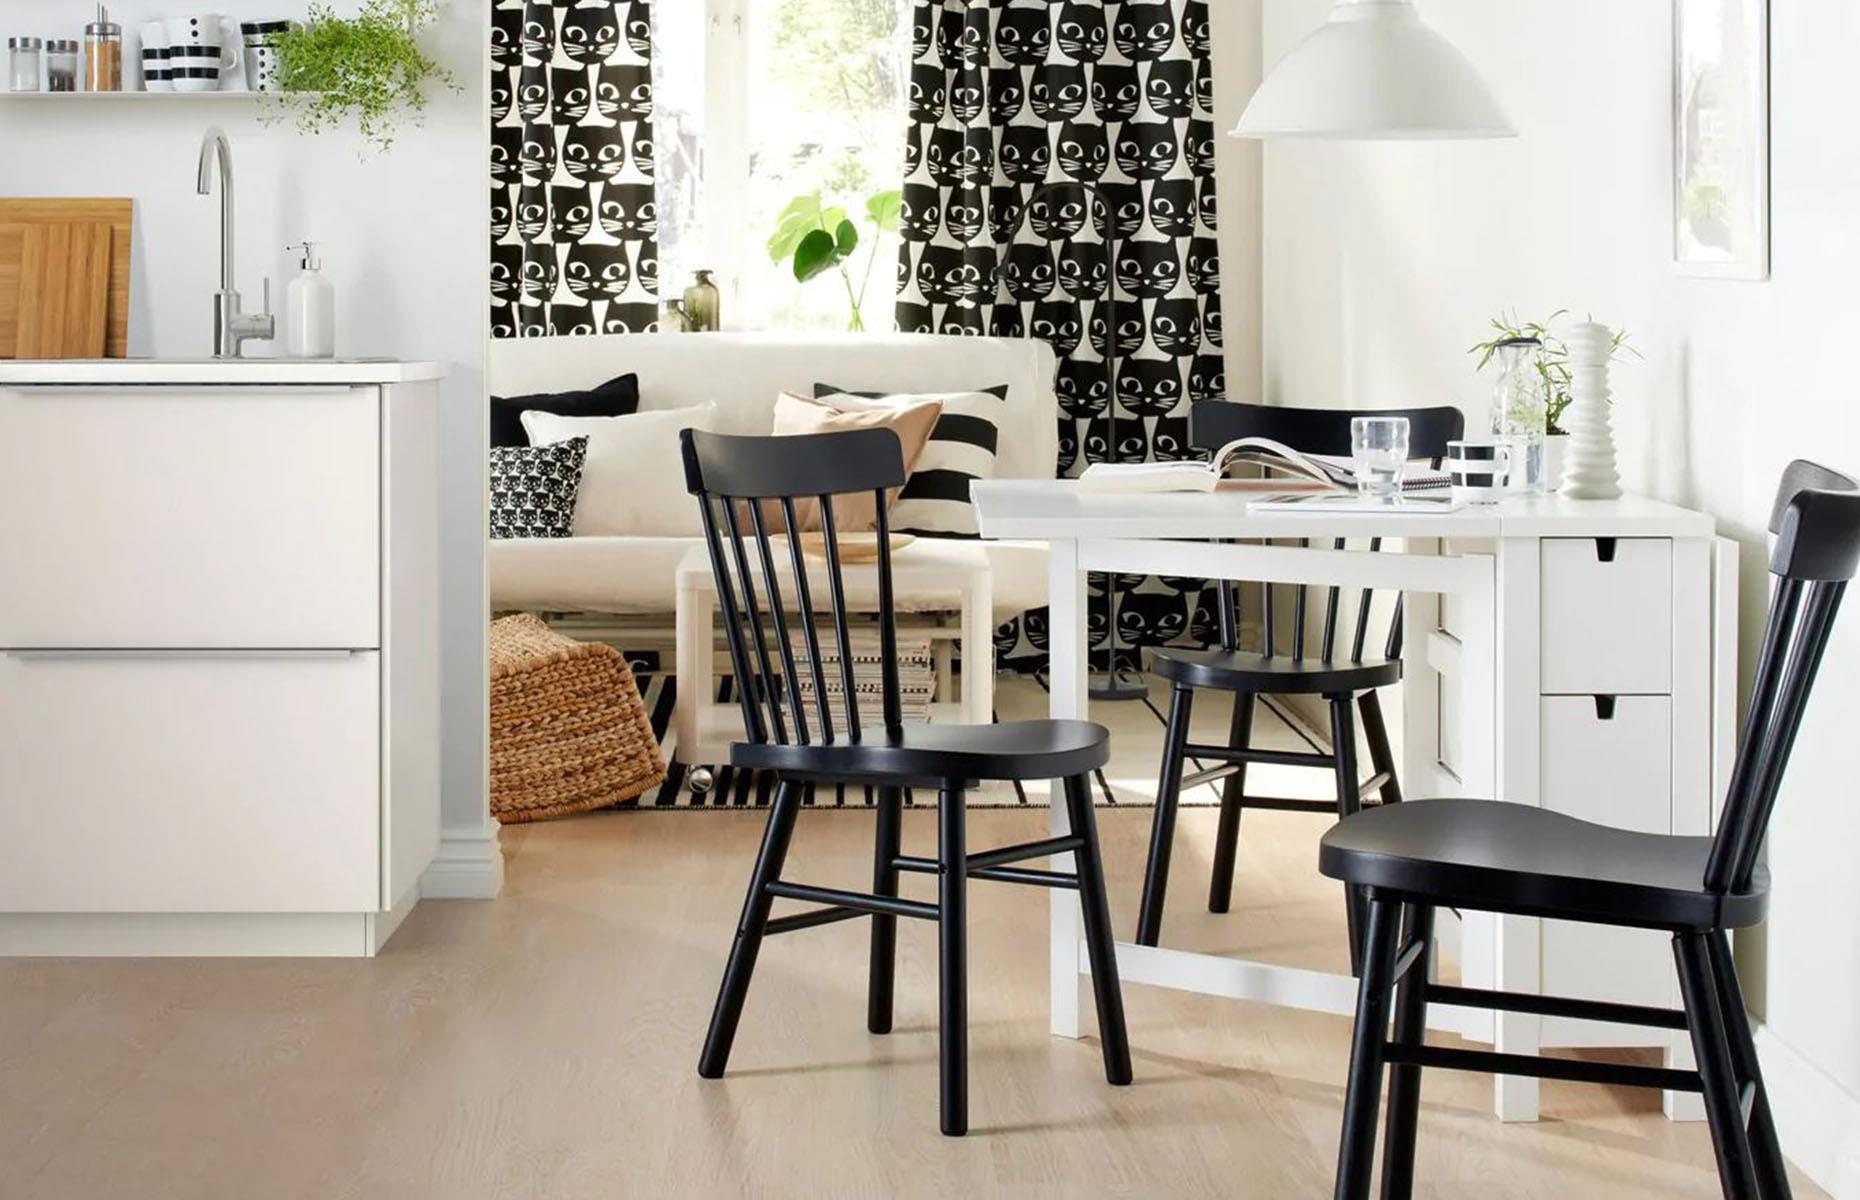 <p>For open-plan rooms where space is at a premium, consider investing in clever furnishings that have been specially made for snug schemes. This angular IKEA table frees up the thoroughfare with its unique triangular design, which can also extend to double the length to accommodate guests when needed.</p>  <p>Loved this? Find more smart design ideas <strong><a href="https://bit.ly/2EOOjuy">on our Facebook page</a></strong></p>